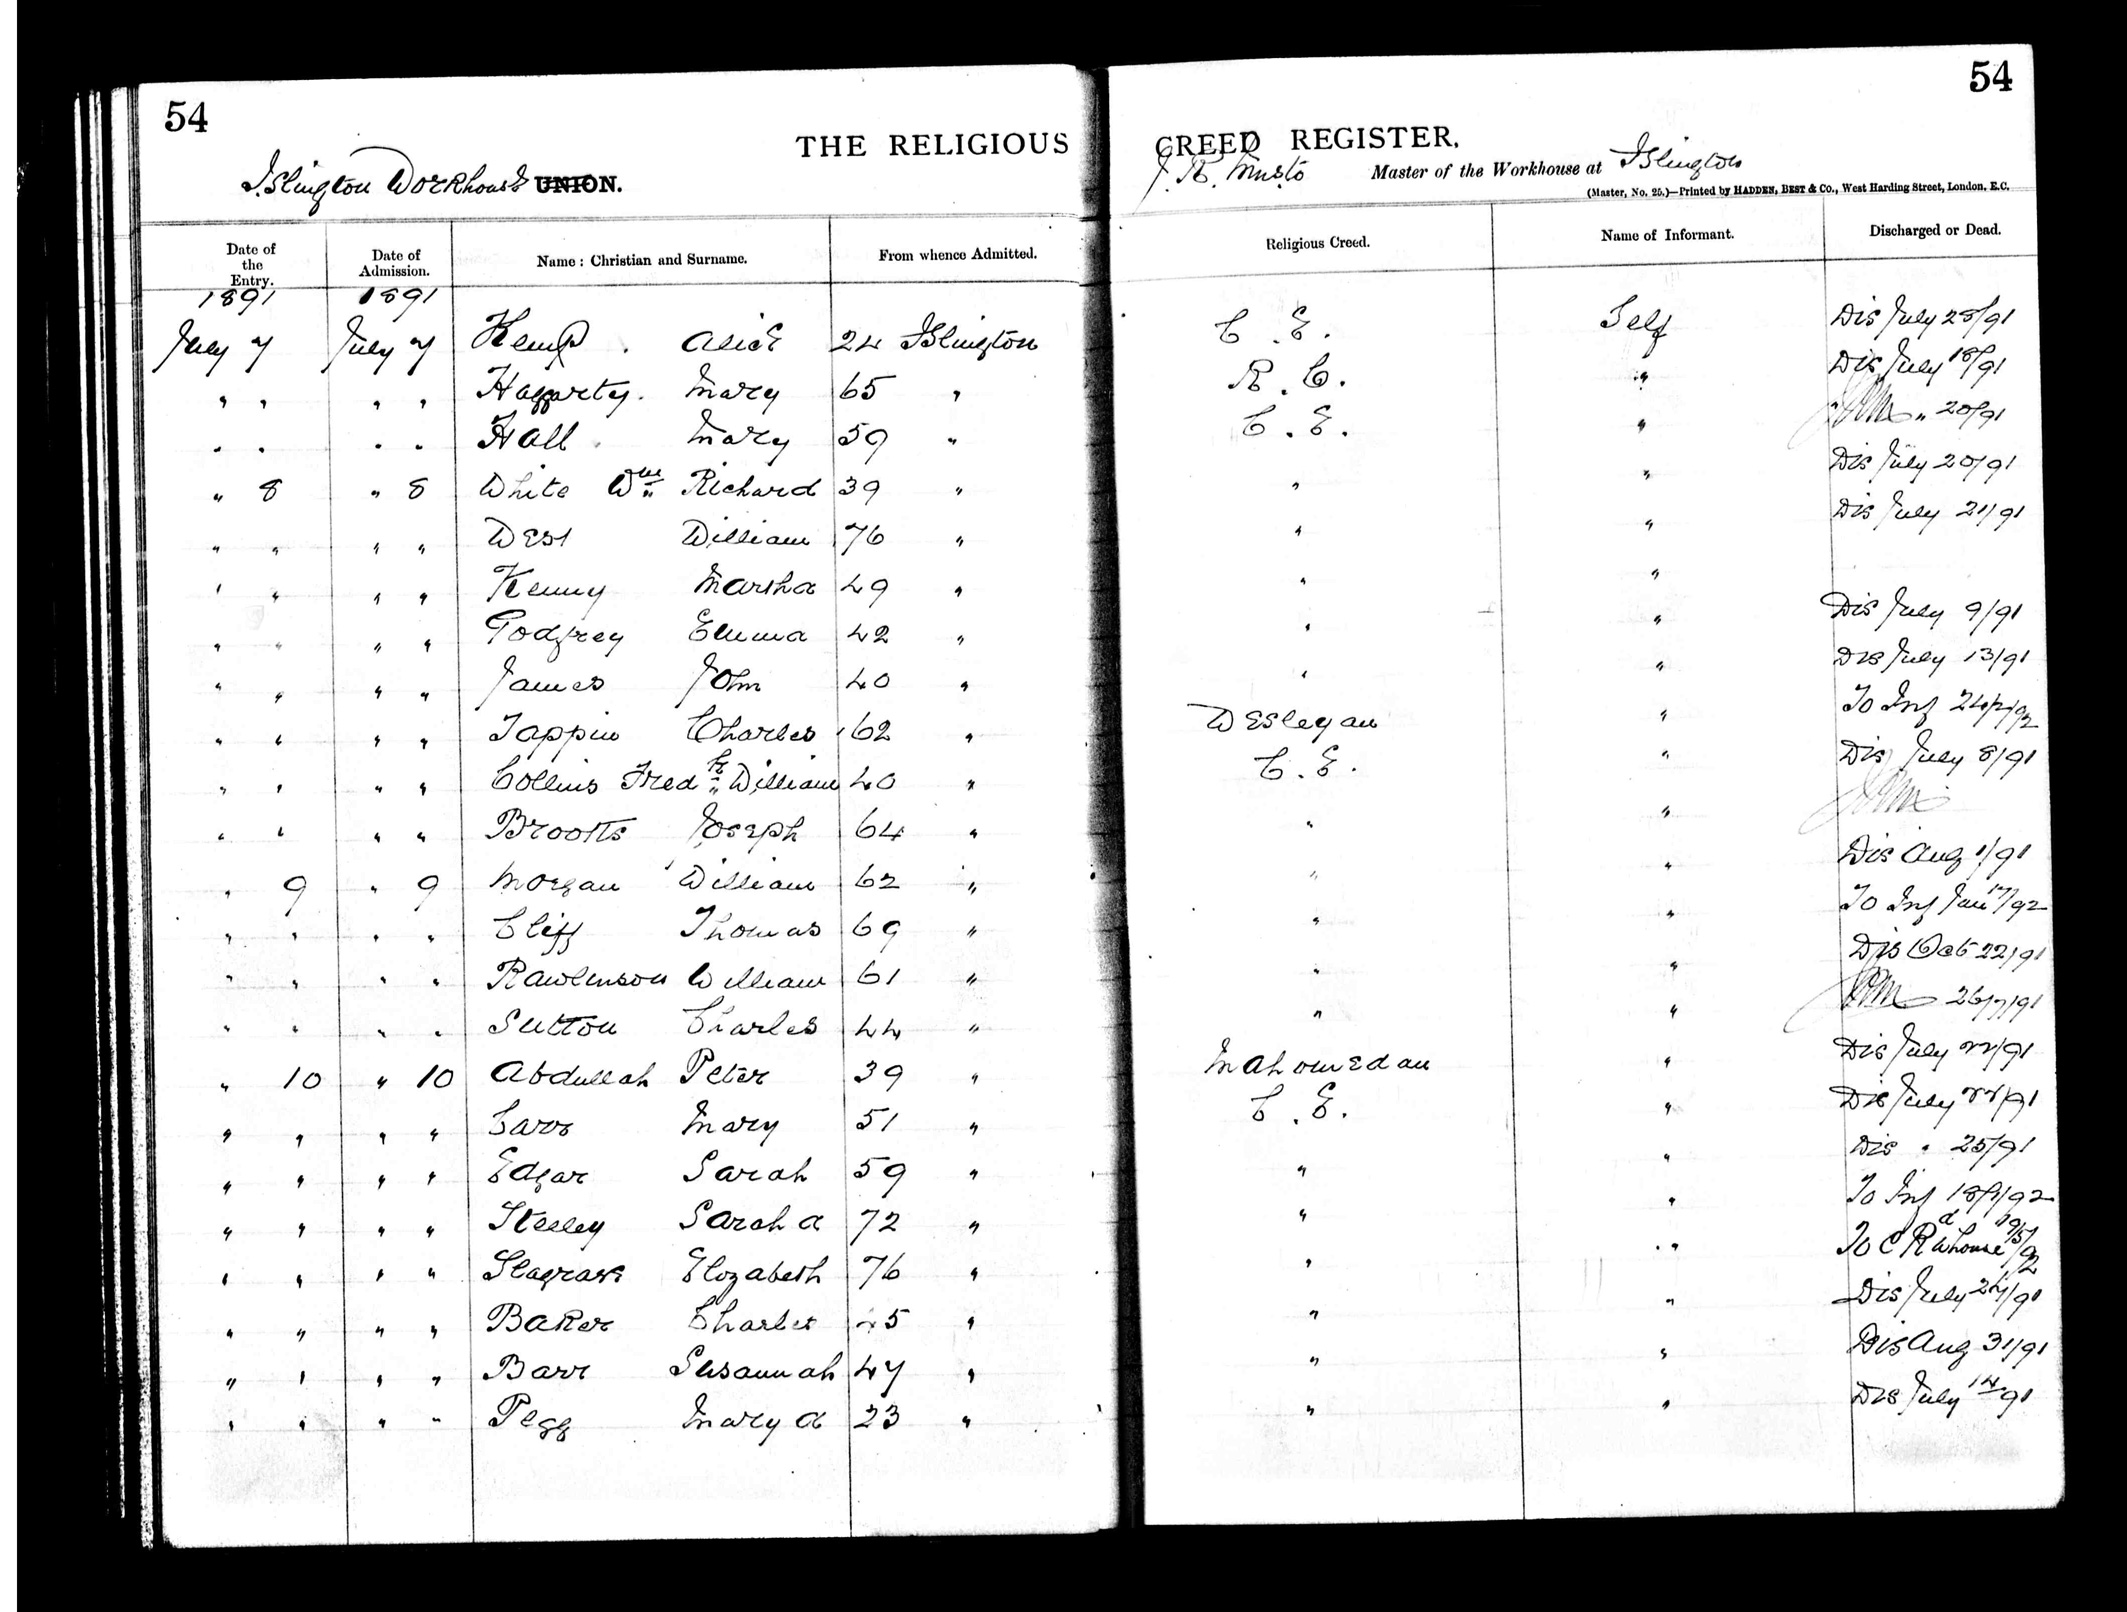 Charles Tappin at the age of 62 in the Islington Workhouse registers